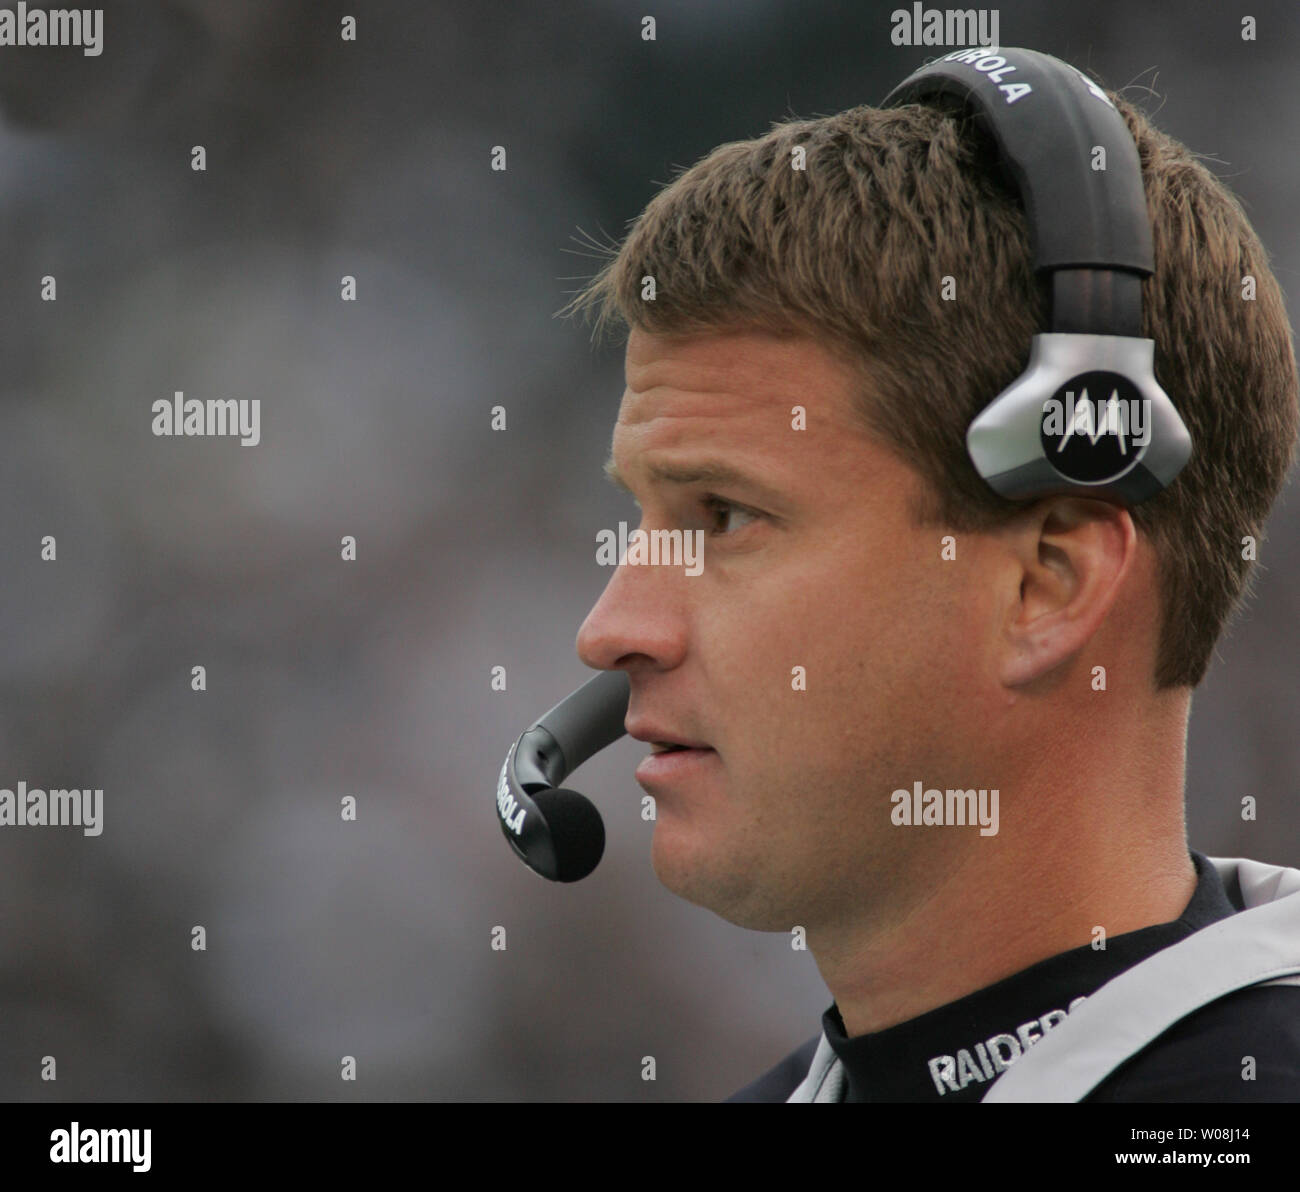 Oakland Raiders head coach Lane Kiffin watches the Indianapolis Colts defeat the Raiders at Oracle Coliseum in Oakland, California on December 16, 2007.  The Colts defeated the Raiders 21-14.  (UPI Photo/Terry Schmitt) Stock Photo